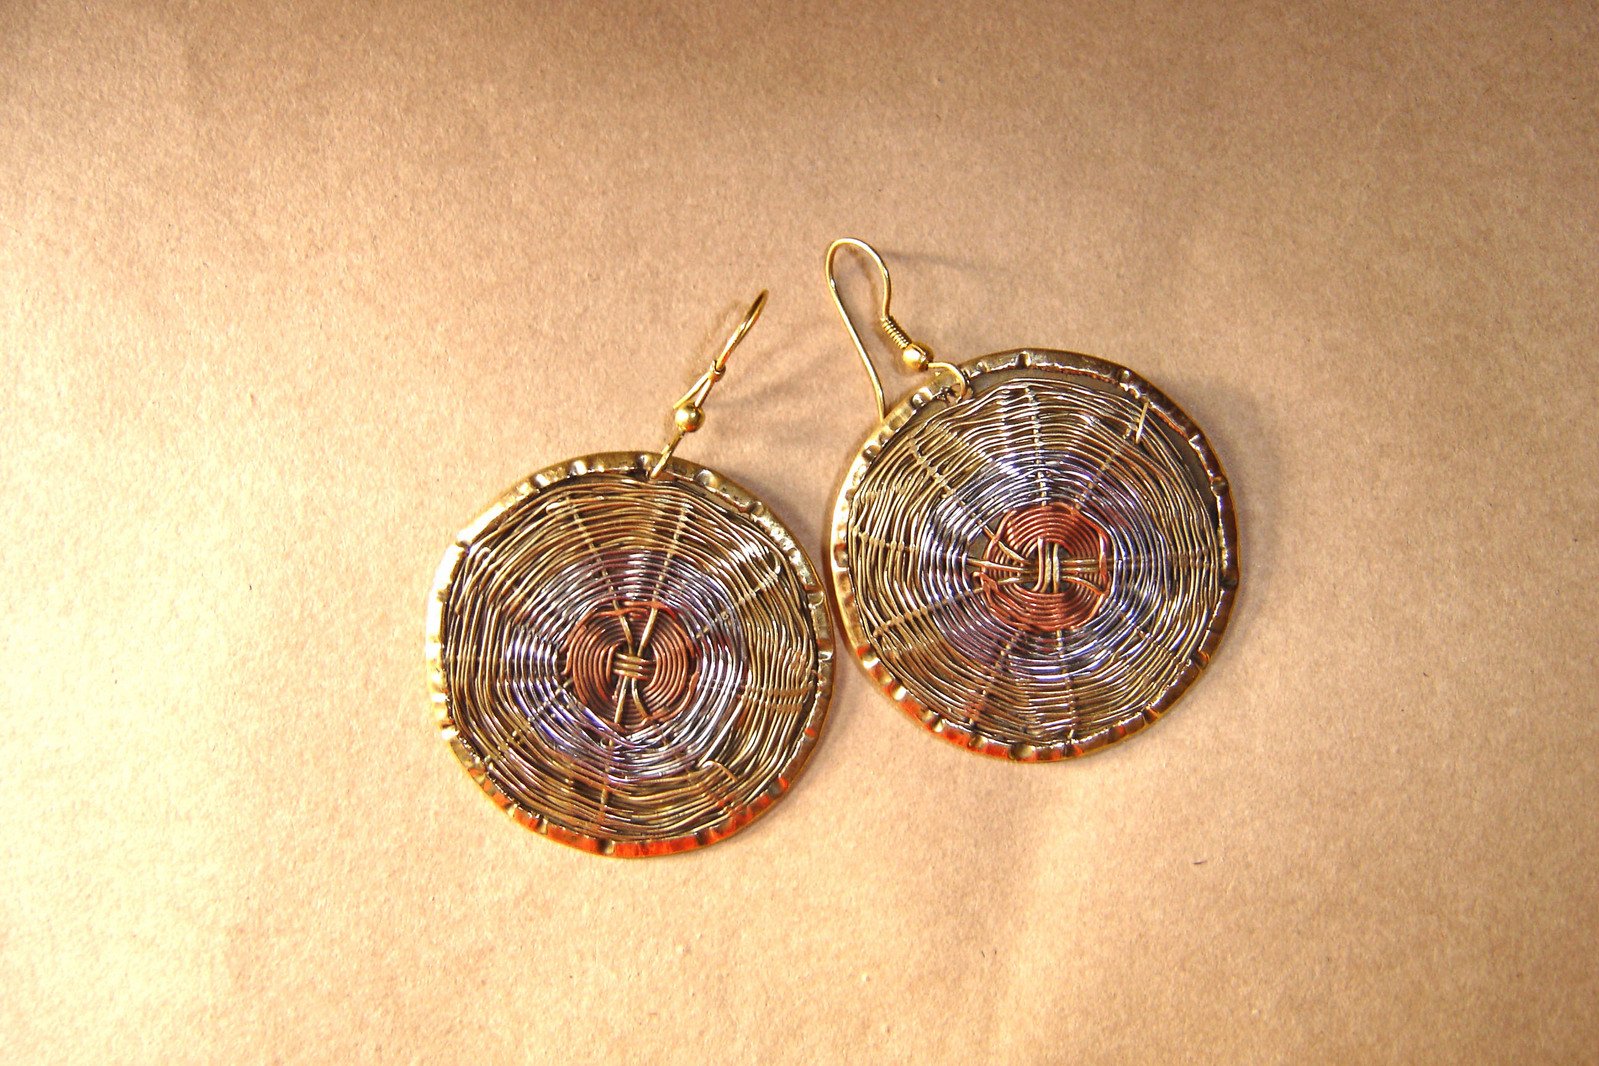 small round metal wire wrapped earrings hanging on a beige background